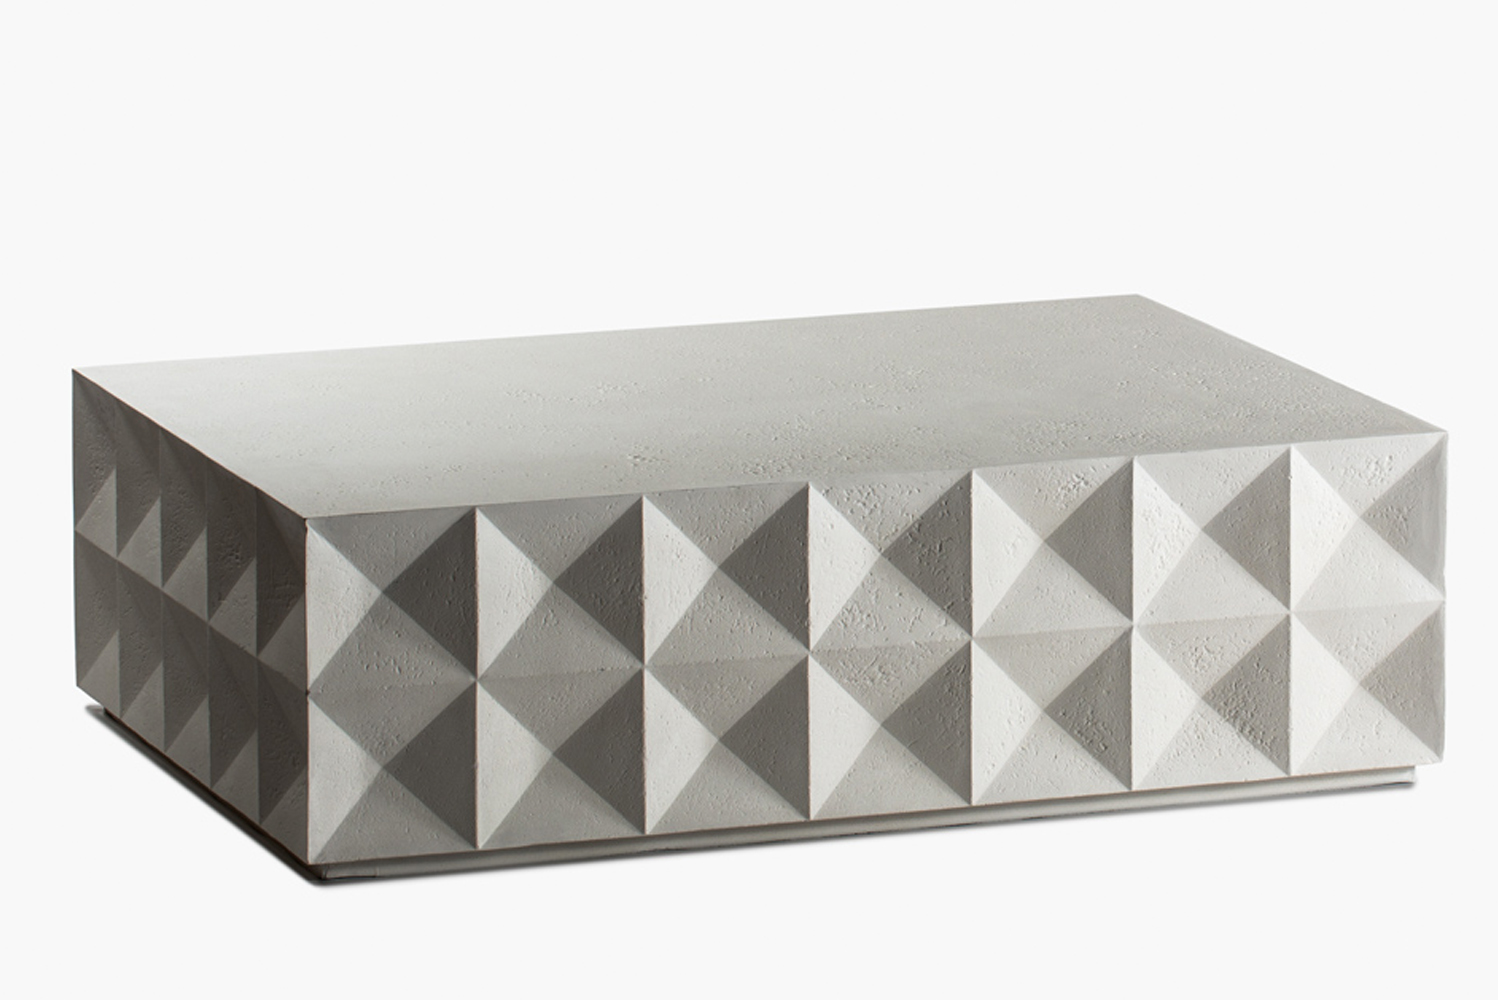 San Diego-based Stone Yard Inc introduced a new geometric cocktail table designed by founder and lead designer Mitch Brean 